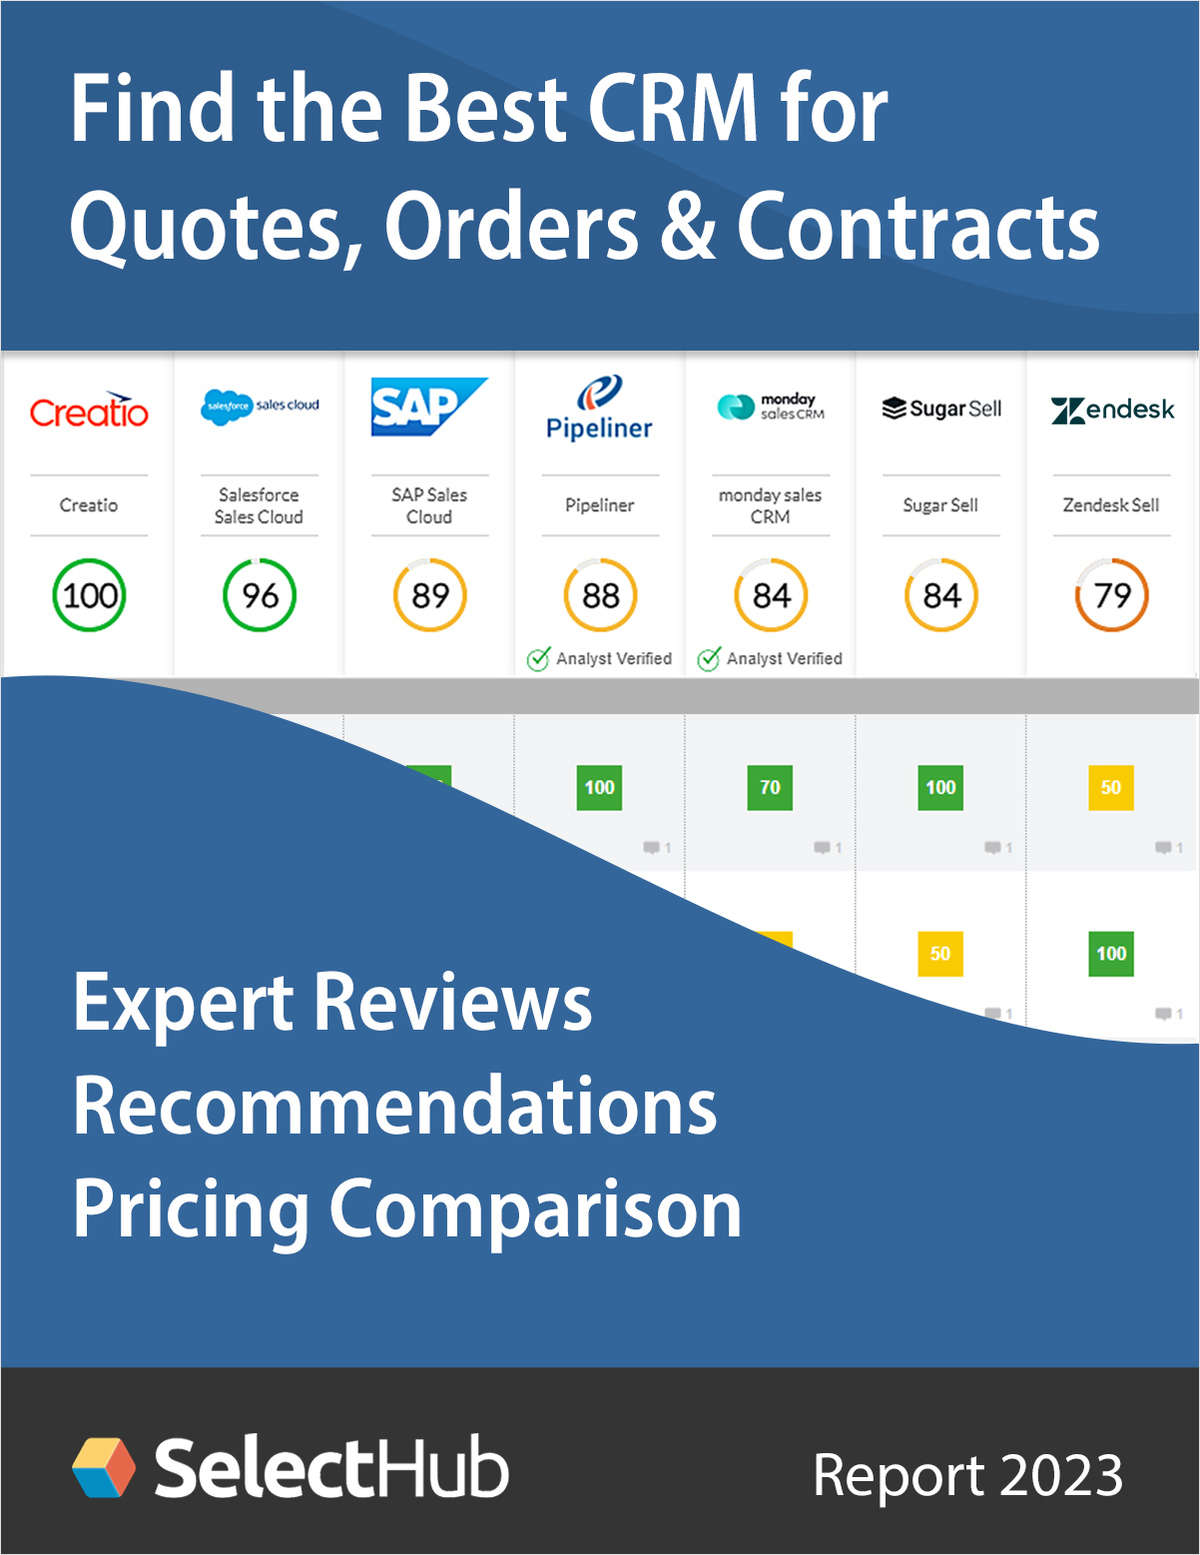 Find the Best CRM Software for Quotes, Orders & Contracts--Expert Comparisons, Recommendations & Pricing